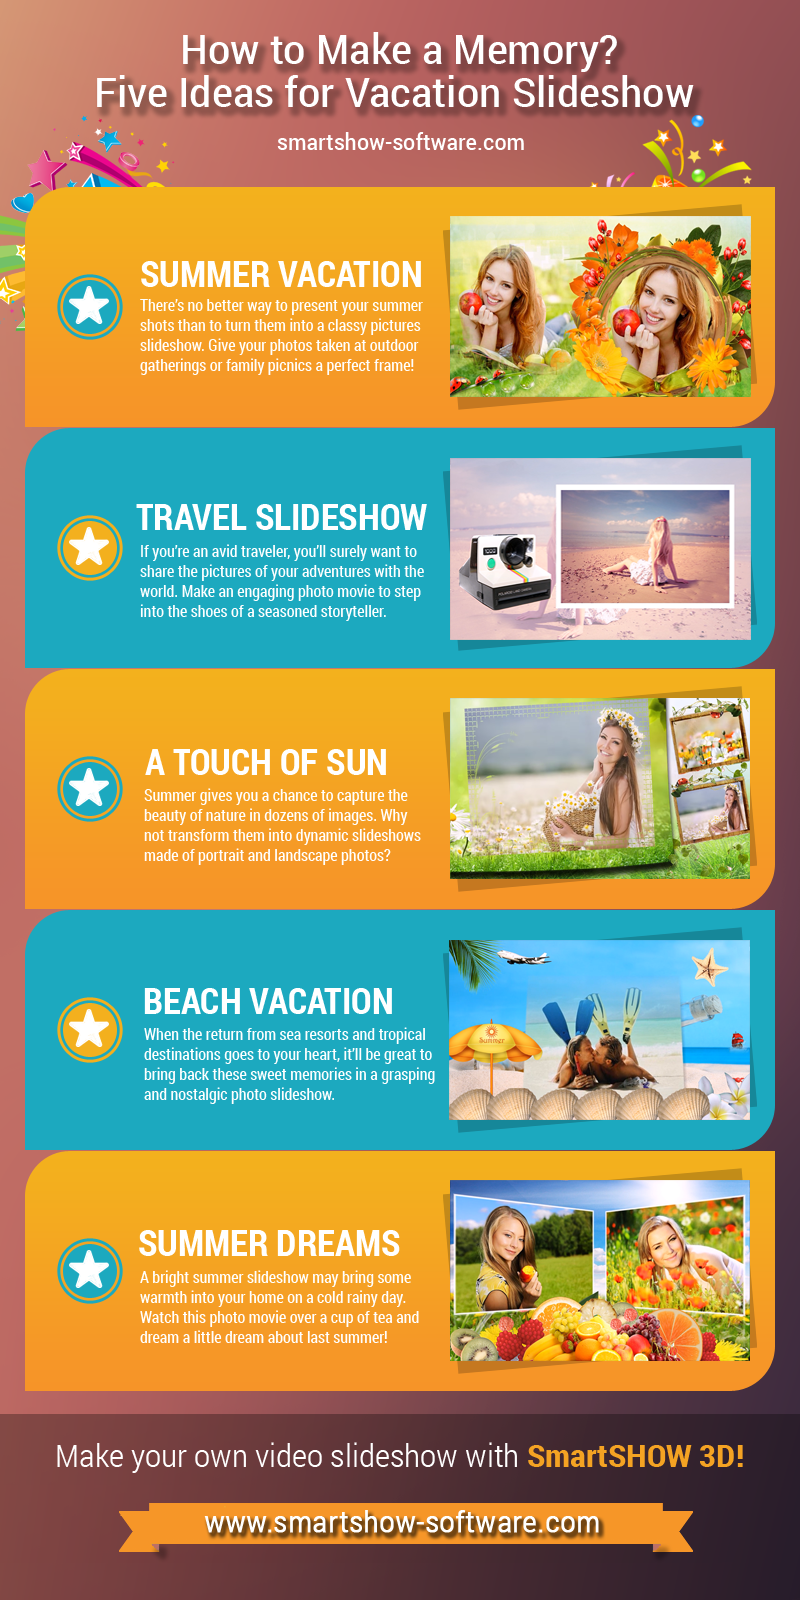 Five ideas for vacation slideshow